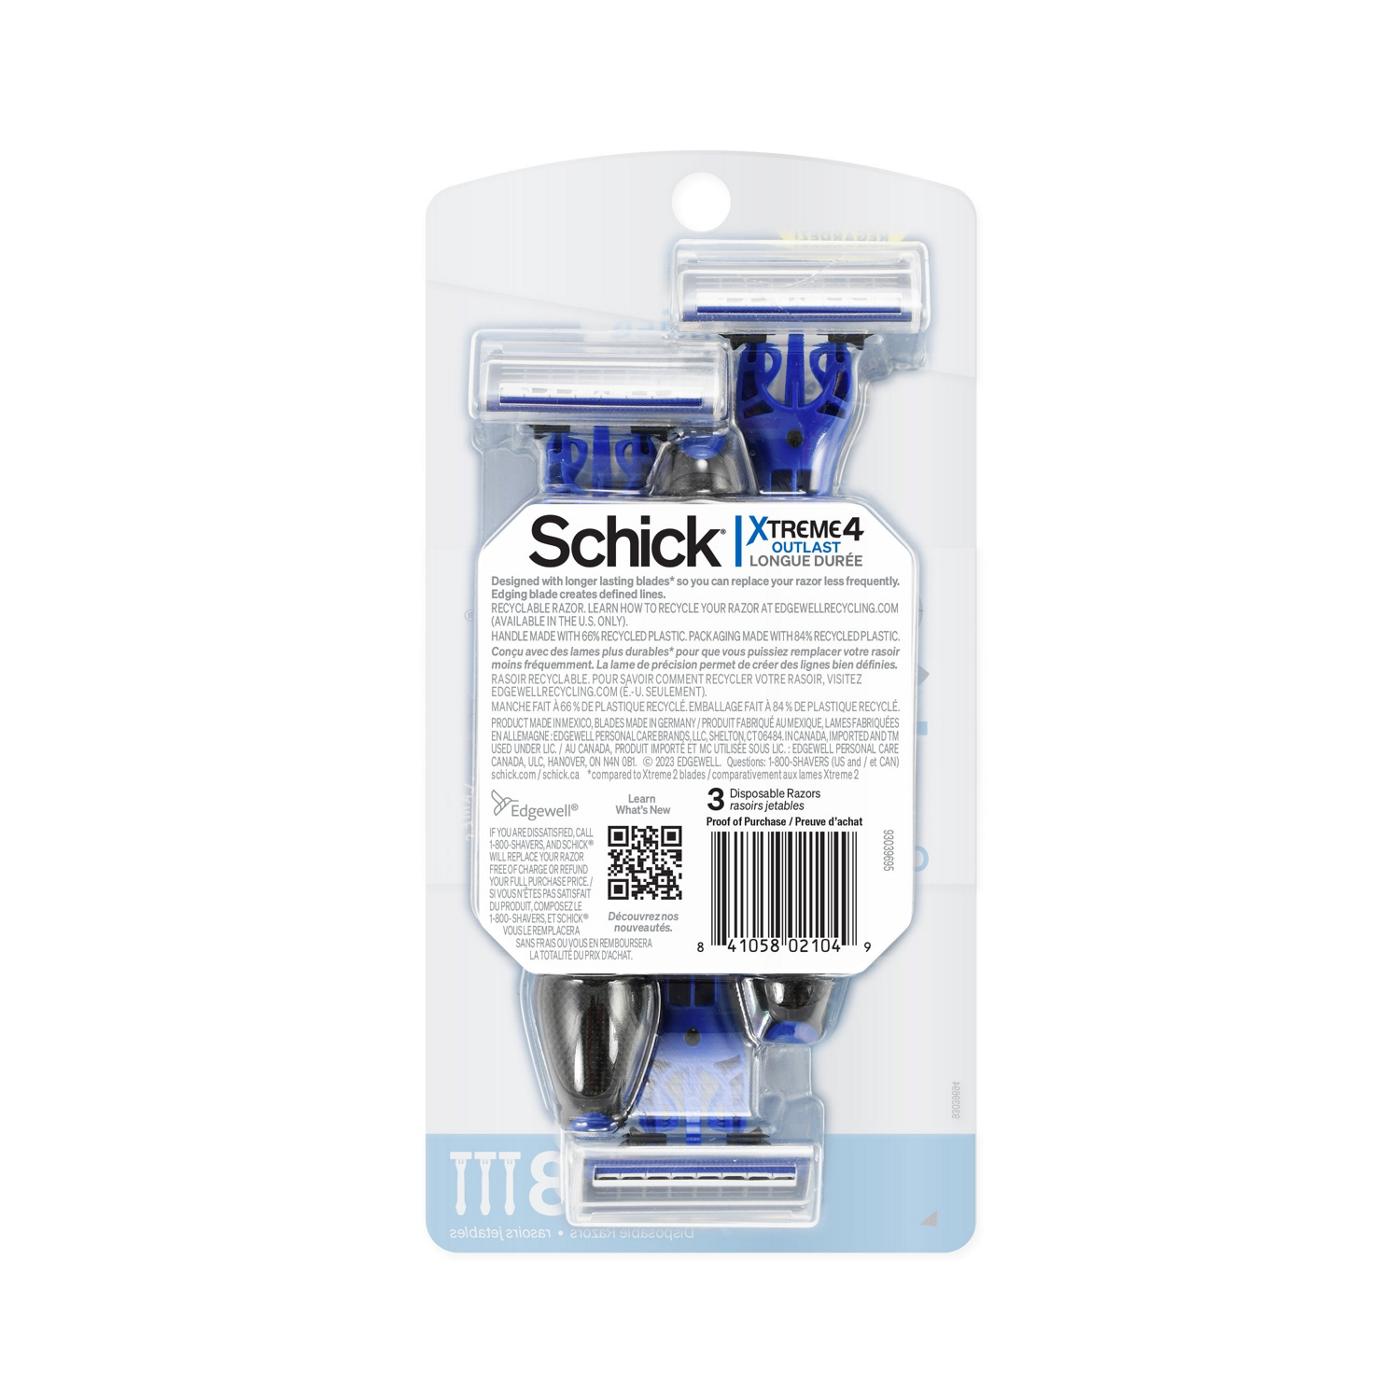 Schick Xtreme 4 Outlast Disposable Razors; image 2 of 6